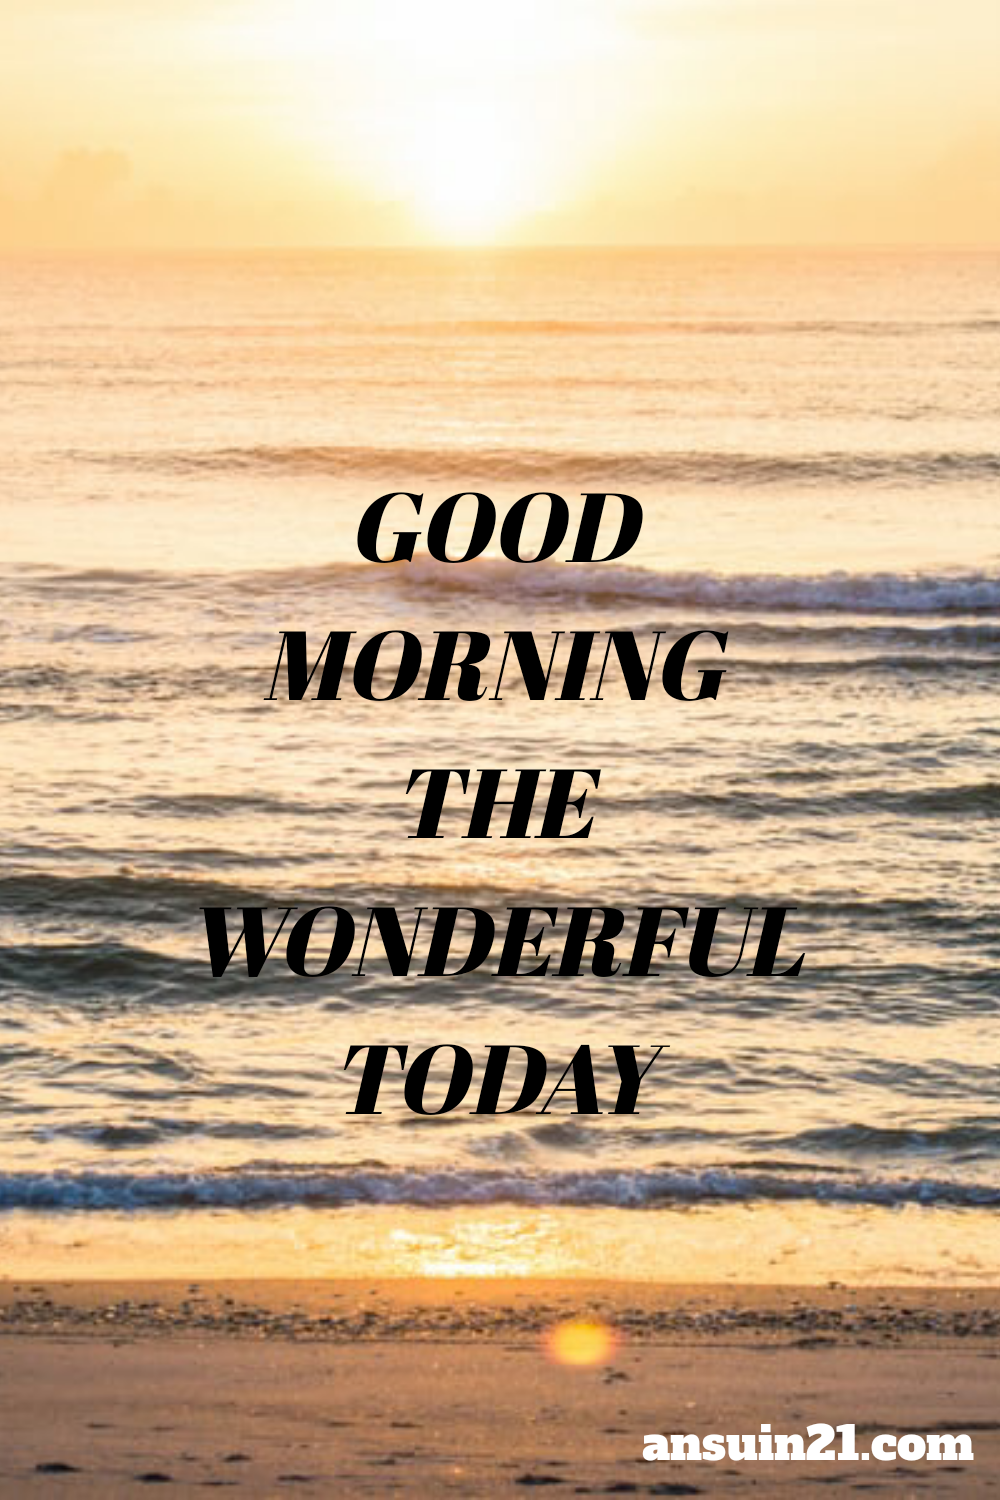 Best Good Morning HD Images, Wishes, Status for whatsaap HD Wallpaper free download,